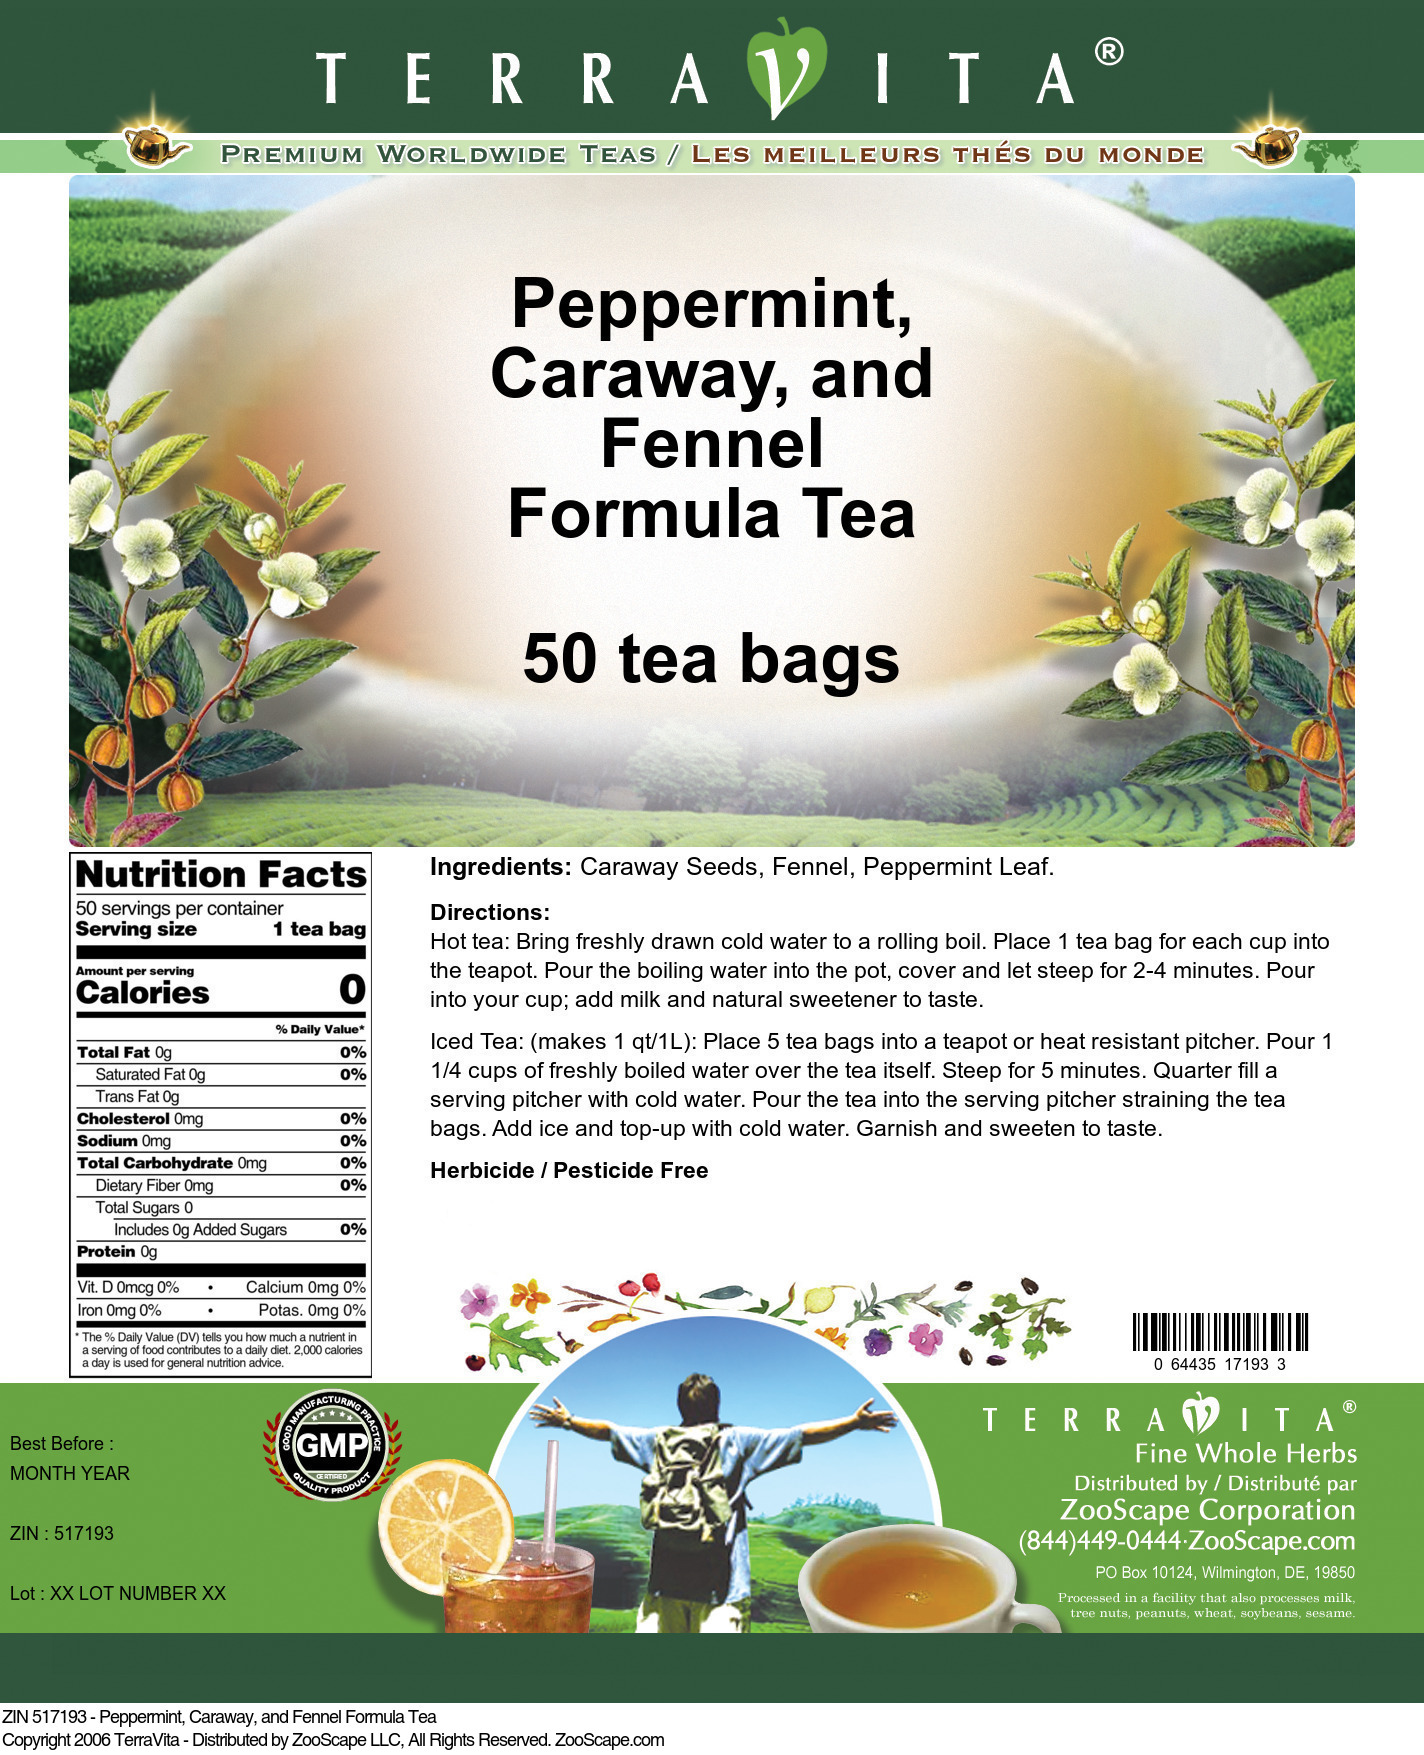 Peppermint, Caraway, and Fennel Formula Tea - Label